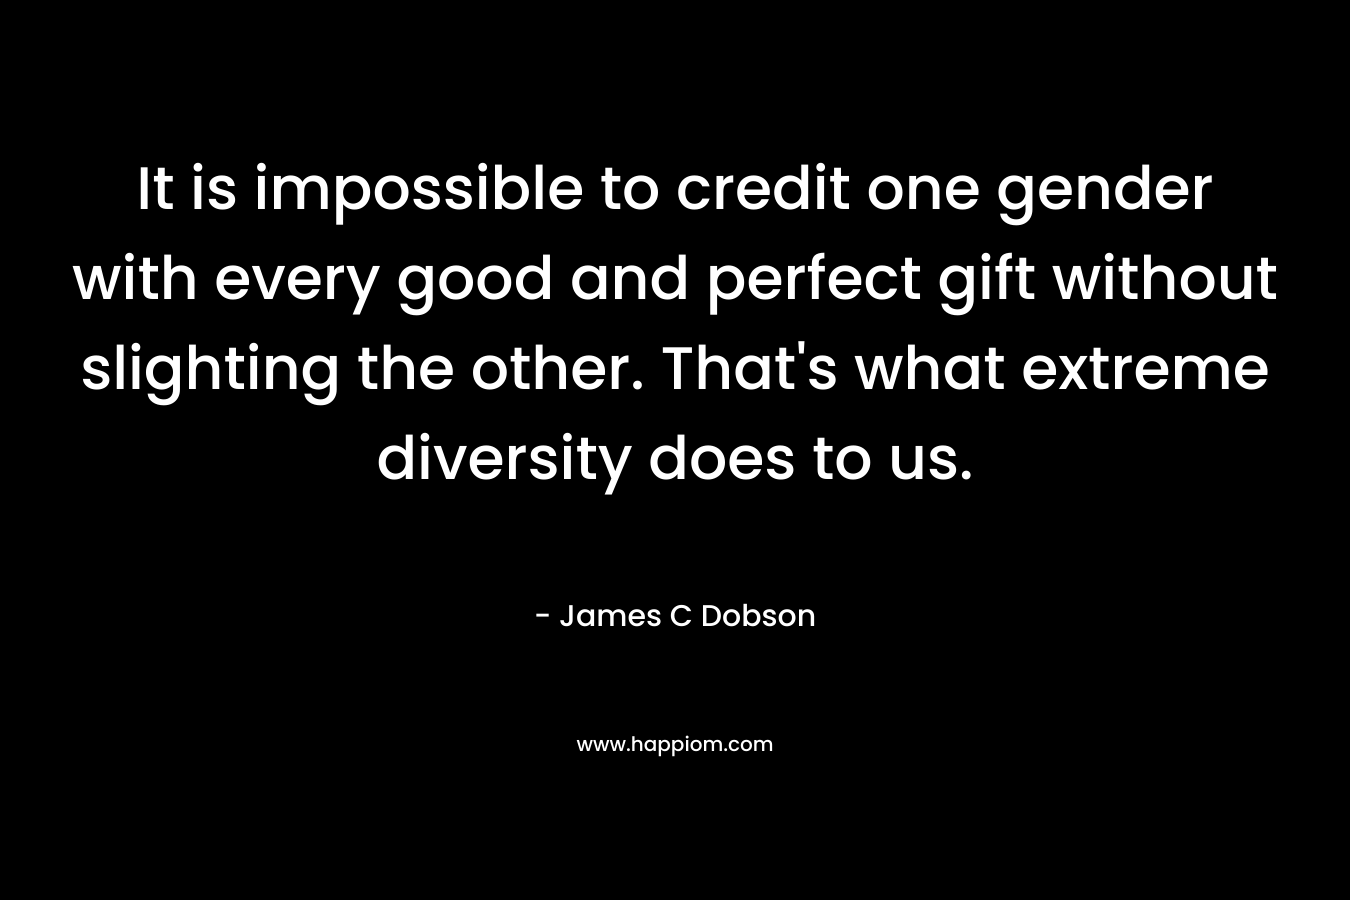 It is impossible to credit one gender with every good and perfect gift without slighting the other. That’s what extreme diversity does to us. – James C Dobson